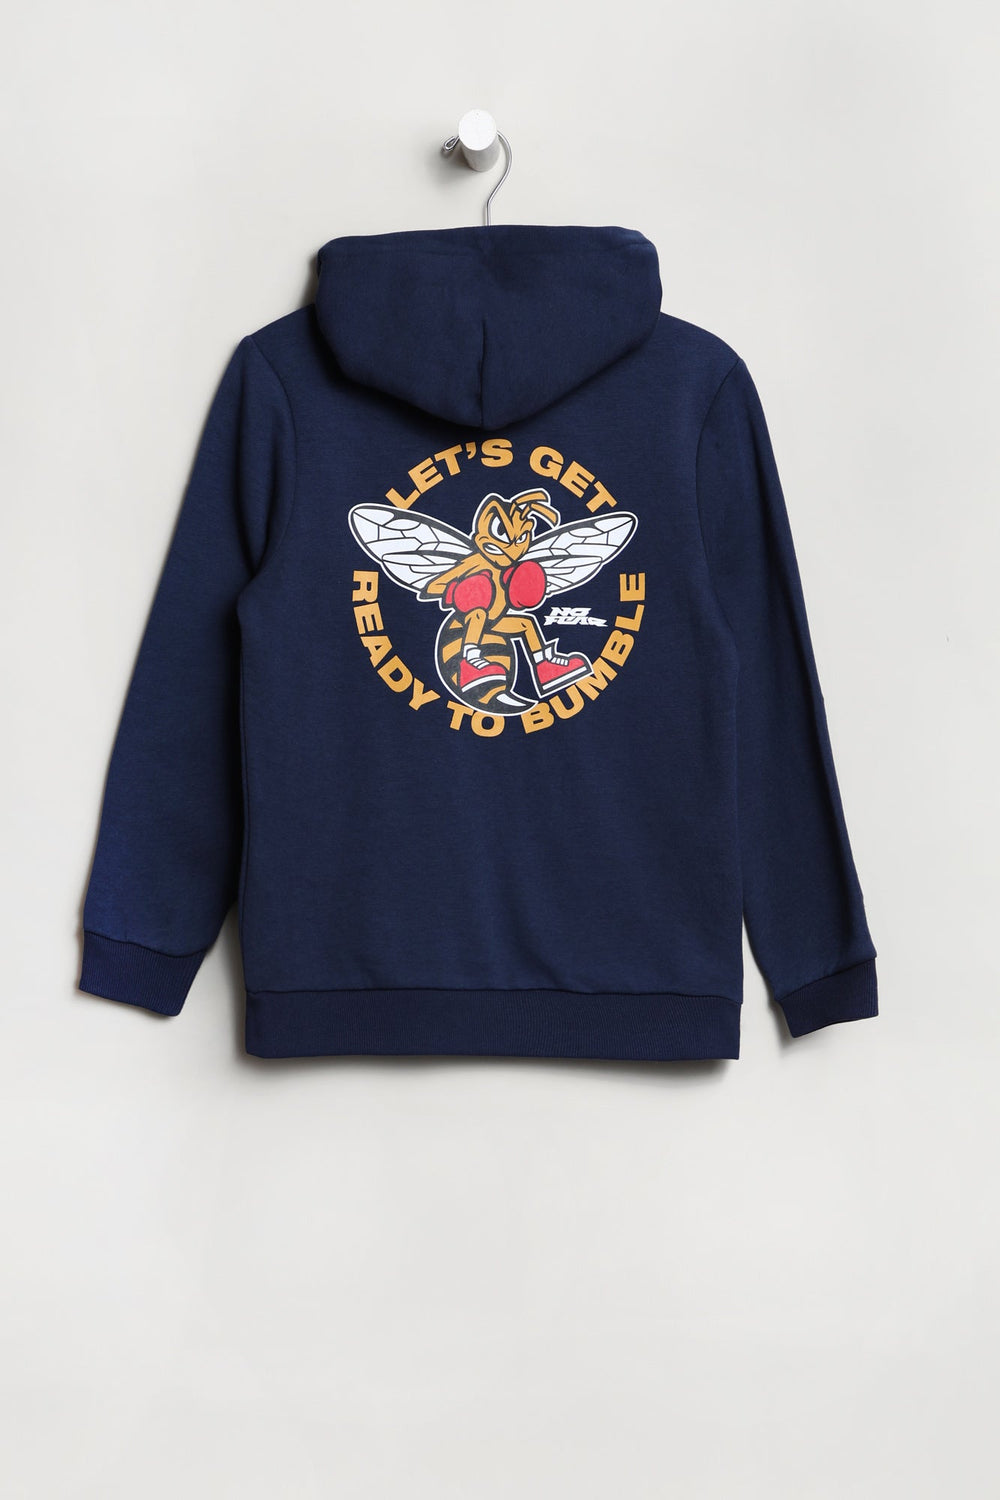 No Fear Youth Ready to Bumble Hoodie Navy